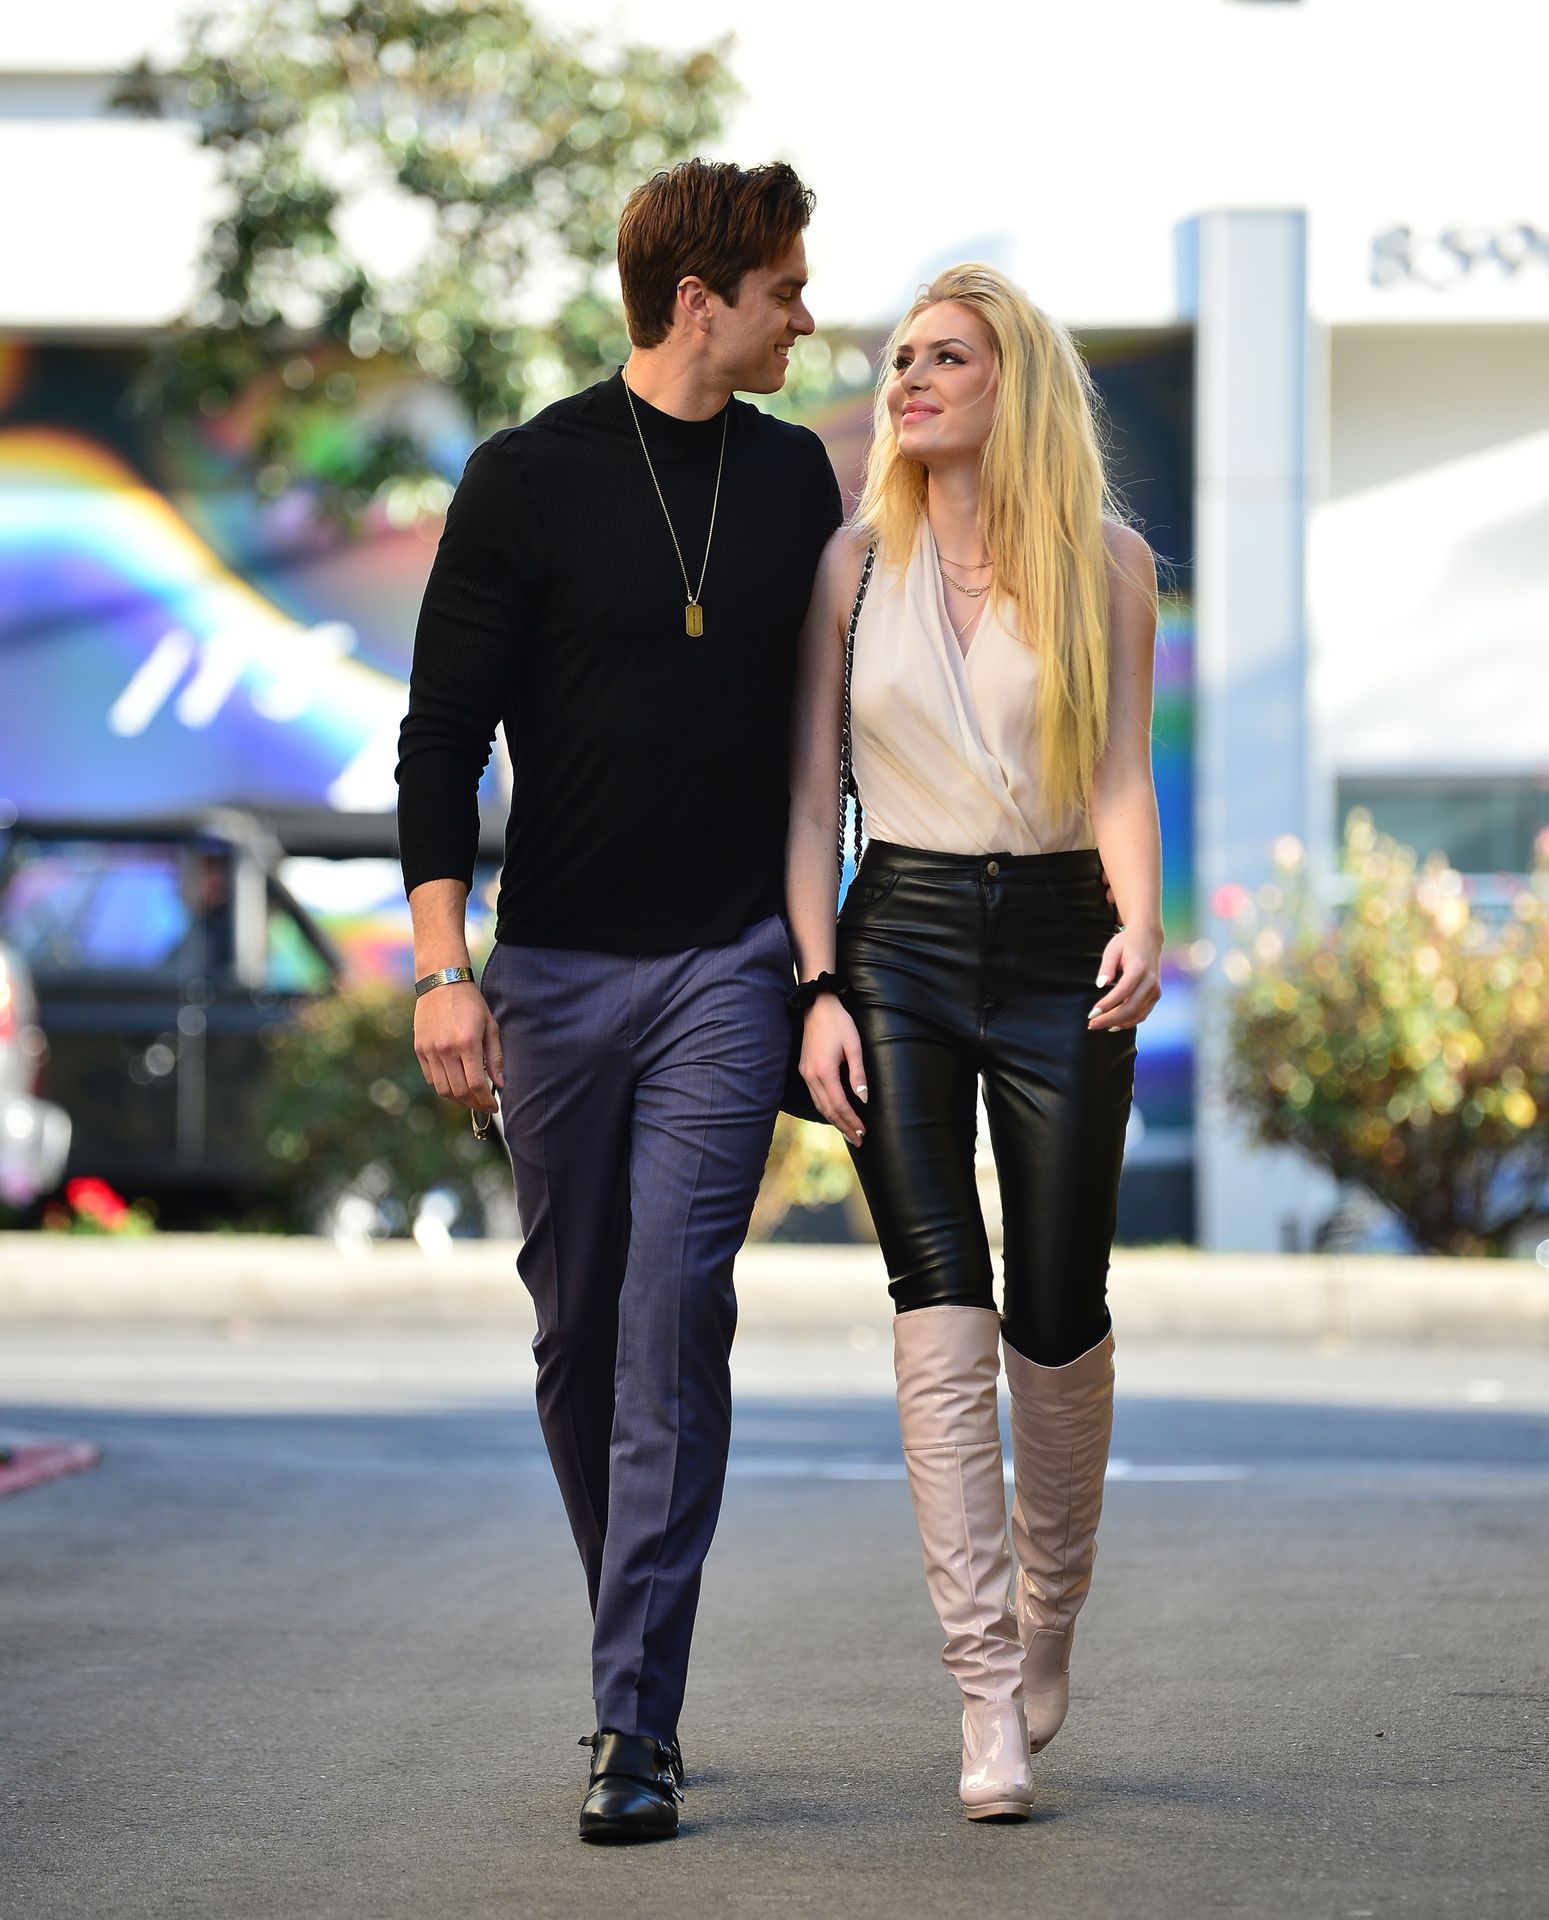 Saxon Sharbino & Pierson Fodé Pack on the PDA After a Romantic lunch in LA (15 Photos)